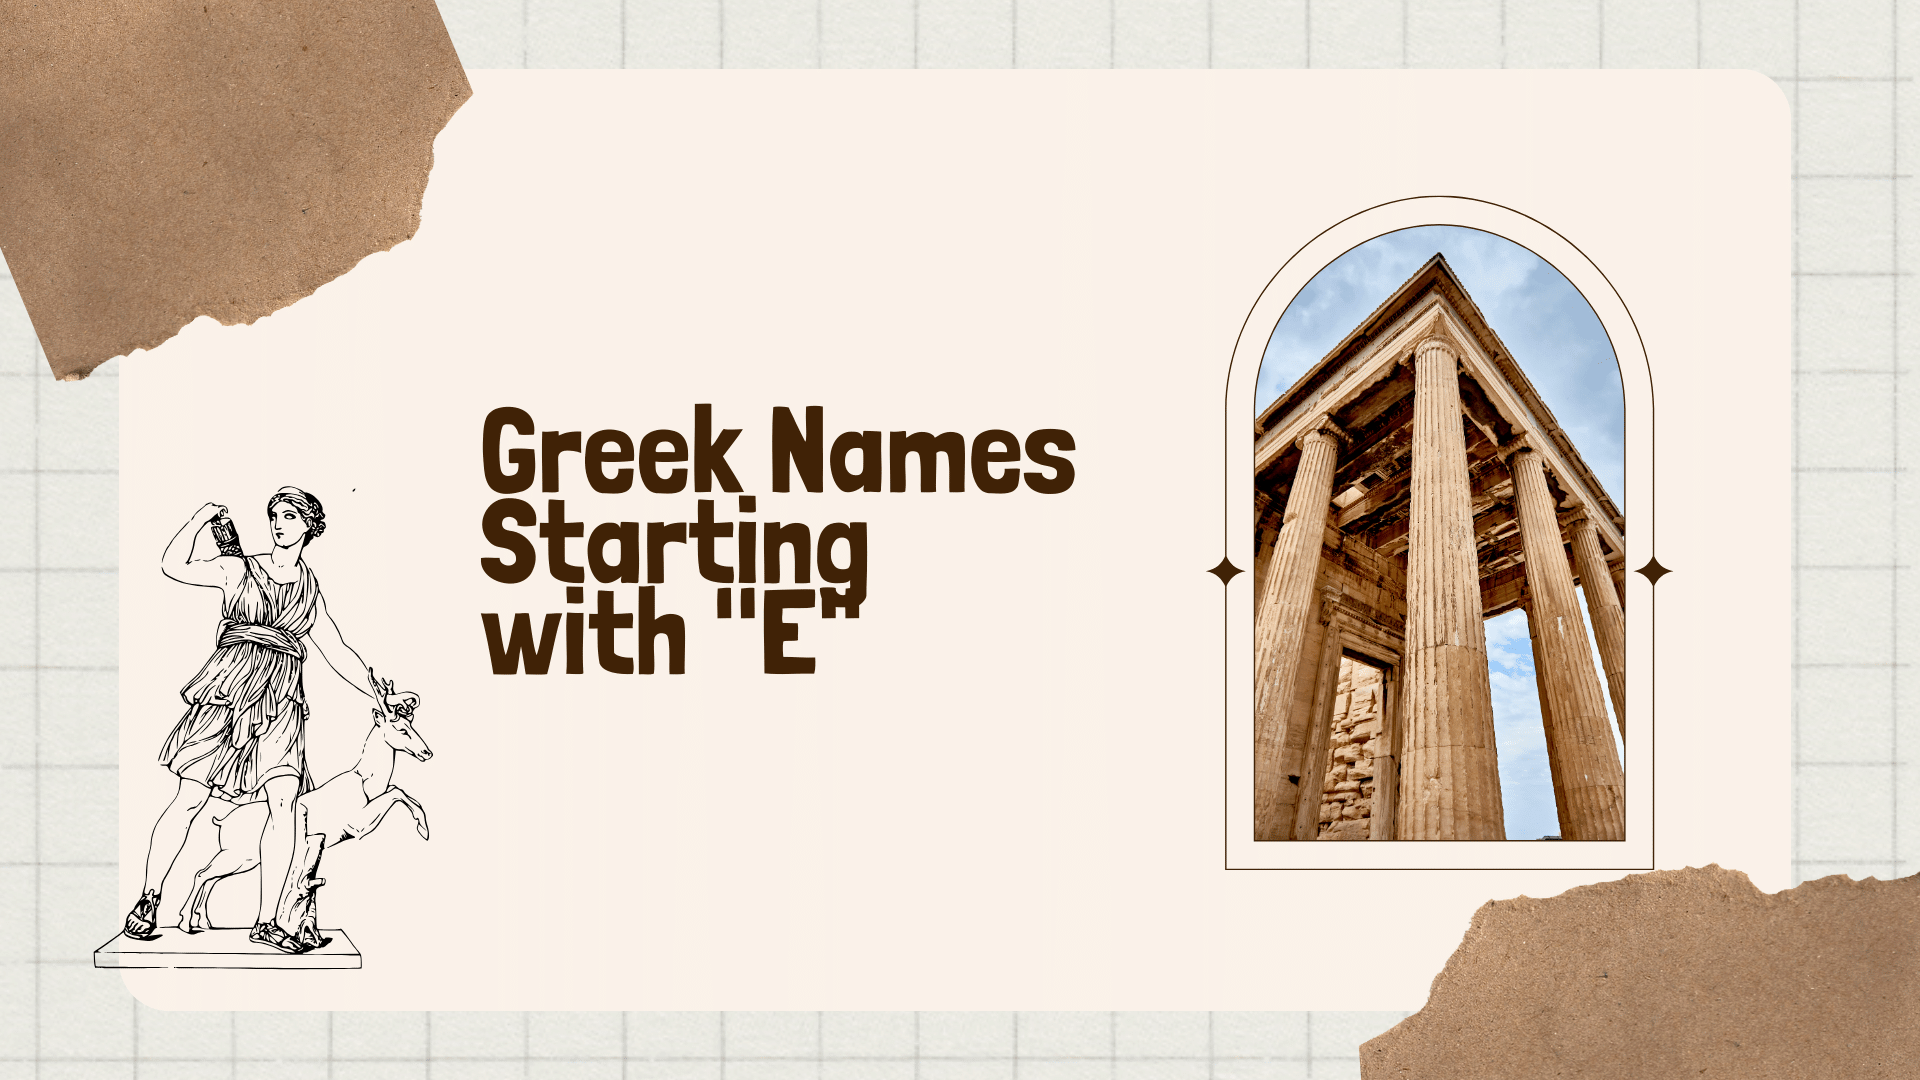 Greek Names Starting with "E"